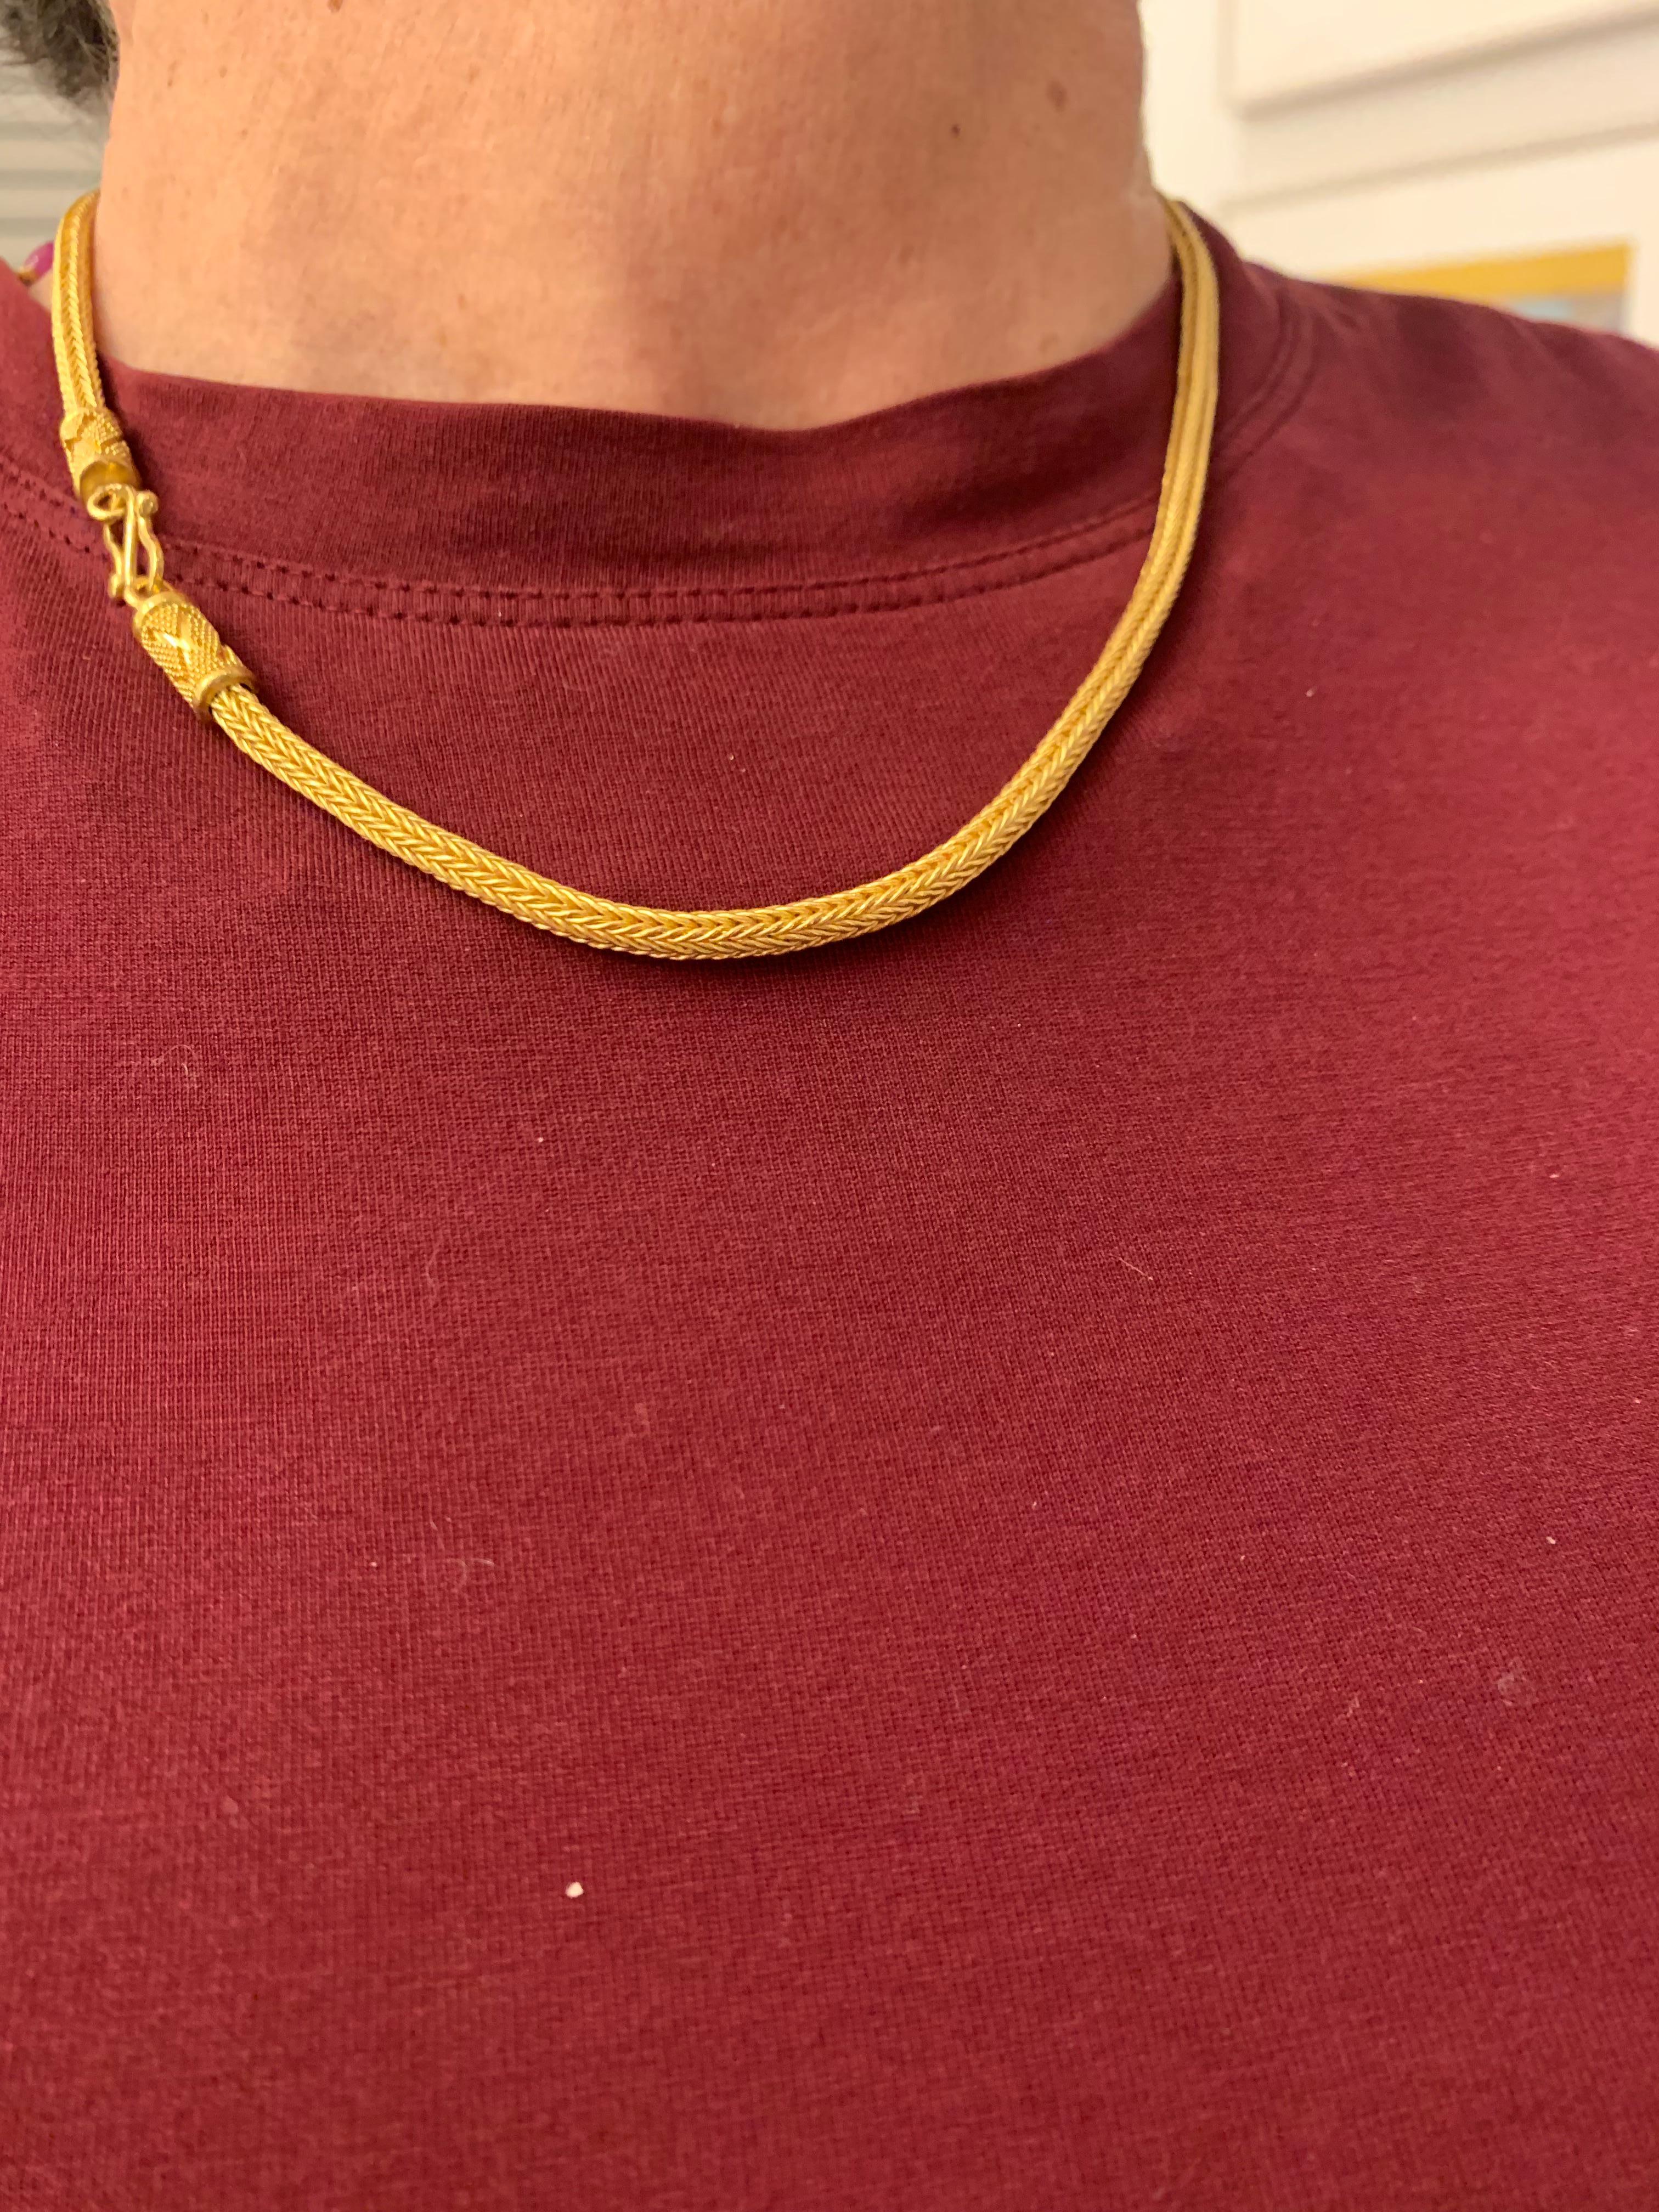 Women's or Men's 22 Karat Gold Necklace Chain Yellow Gold For Sale